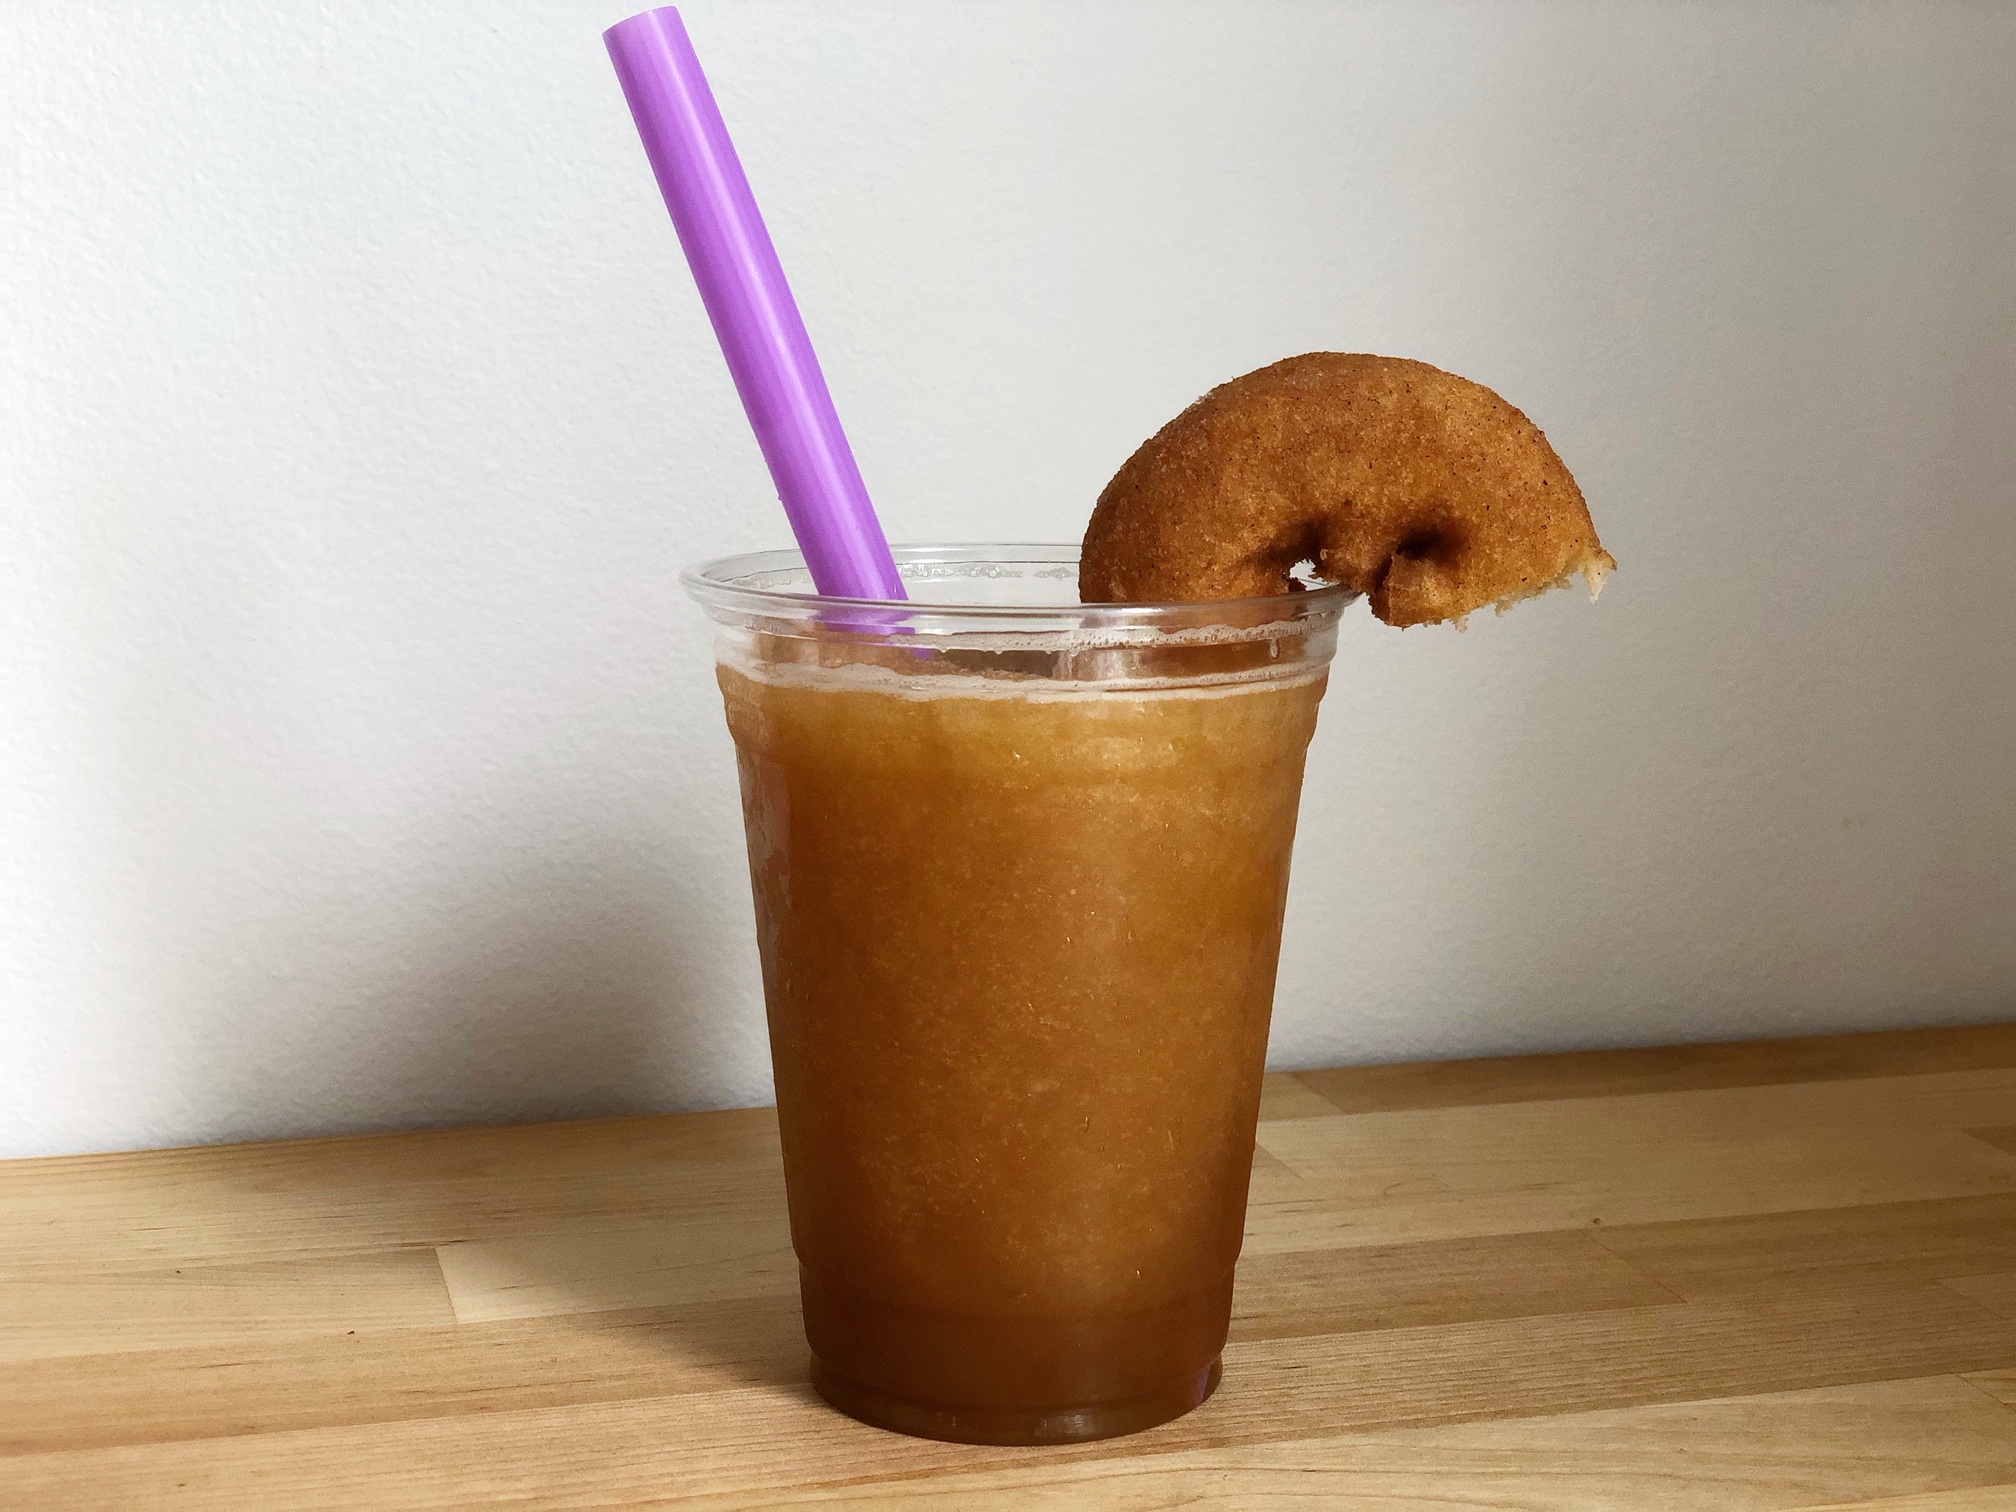 An apple cider slush from Watson's Shack & Rail with a purple straw and a half-donut garnish sit on a butcher block counter. Photo by Alyssa Buckley.